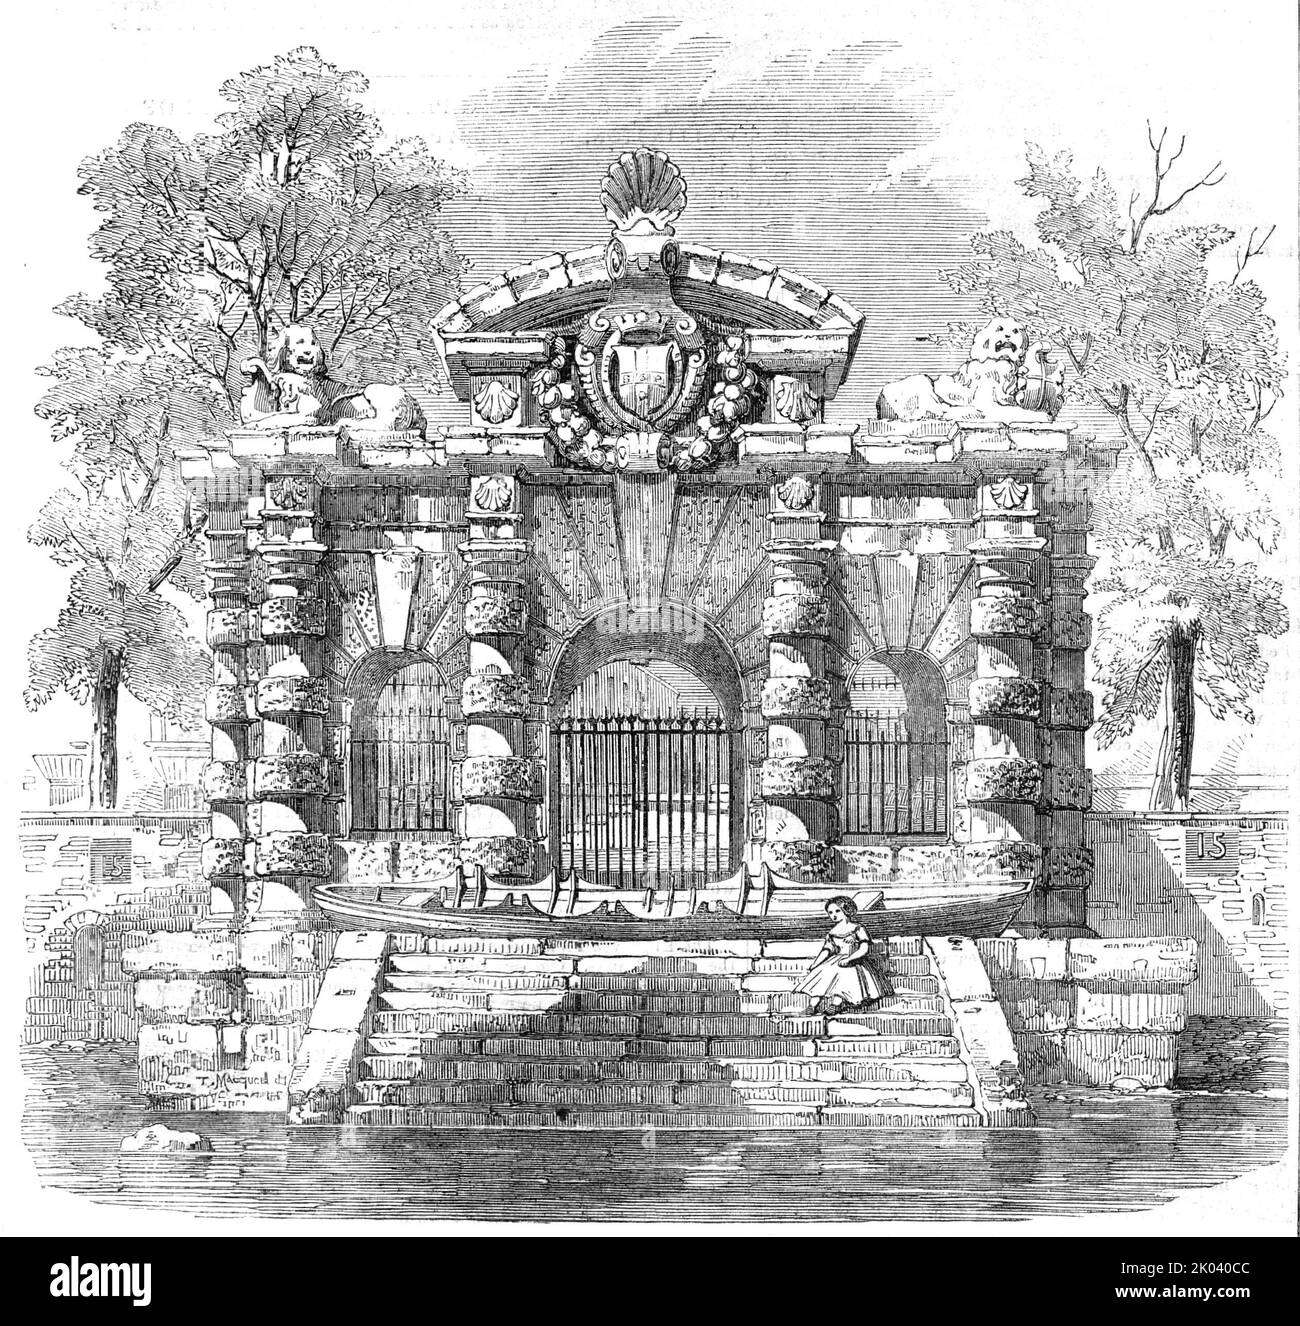 The Water-Gate of York House, Buckingham-Street, Strand, 1854. York Watergate in Westminster, London,, built by George Villiers, c1626. 'The Water-gate...is of Portland stone: in the front, facing Buckingham-Street, are three arches flanked with pilasters, supporting an entablature and four balls; above the keystones of the arches are shields, those at the sides sculptured with anchors, and that in the centre with the arms of Villiers impaling those of the family of Manners. Upon the frieze is the Villiers' motto...The riverfront...has a large archway, opening upon steps to the water; on each Stock Photo